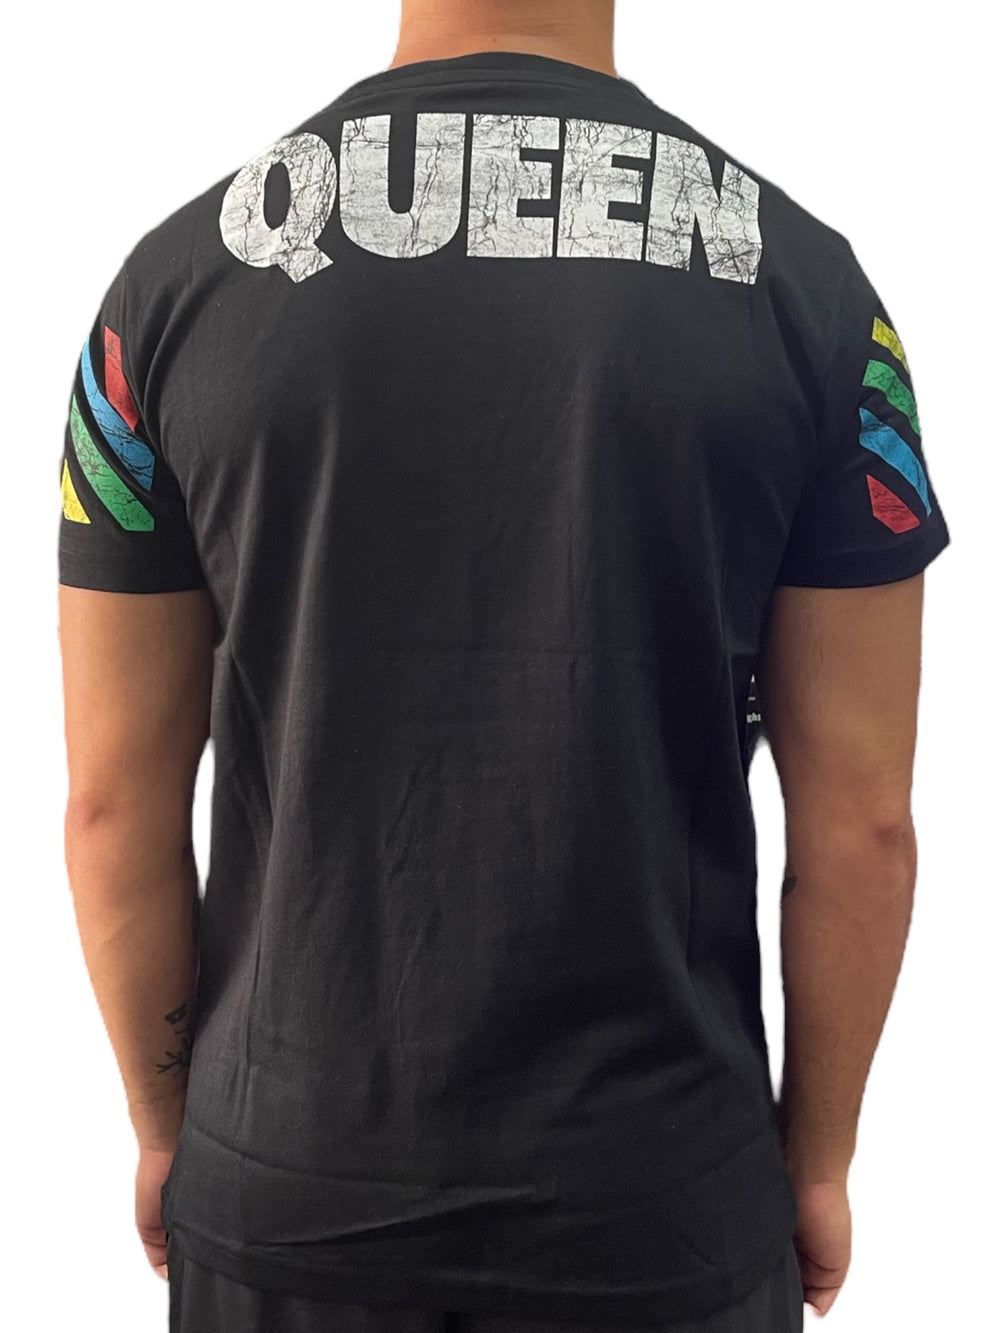 Queen Hot Space Tour '82 Official T Shirt Brand New Various Sizes Freddie Mercury